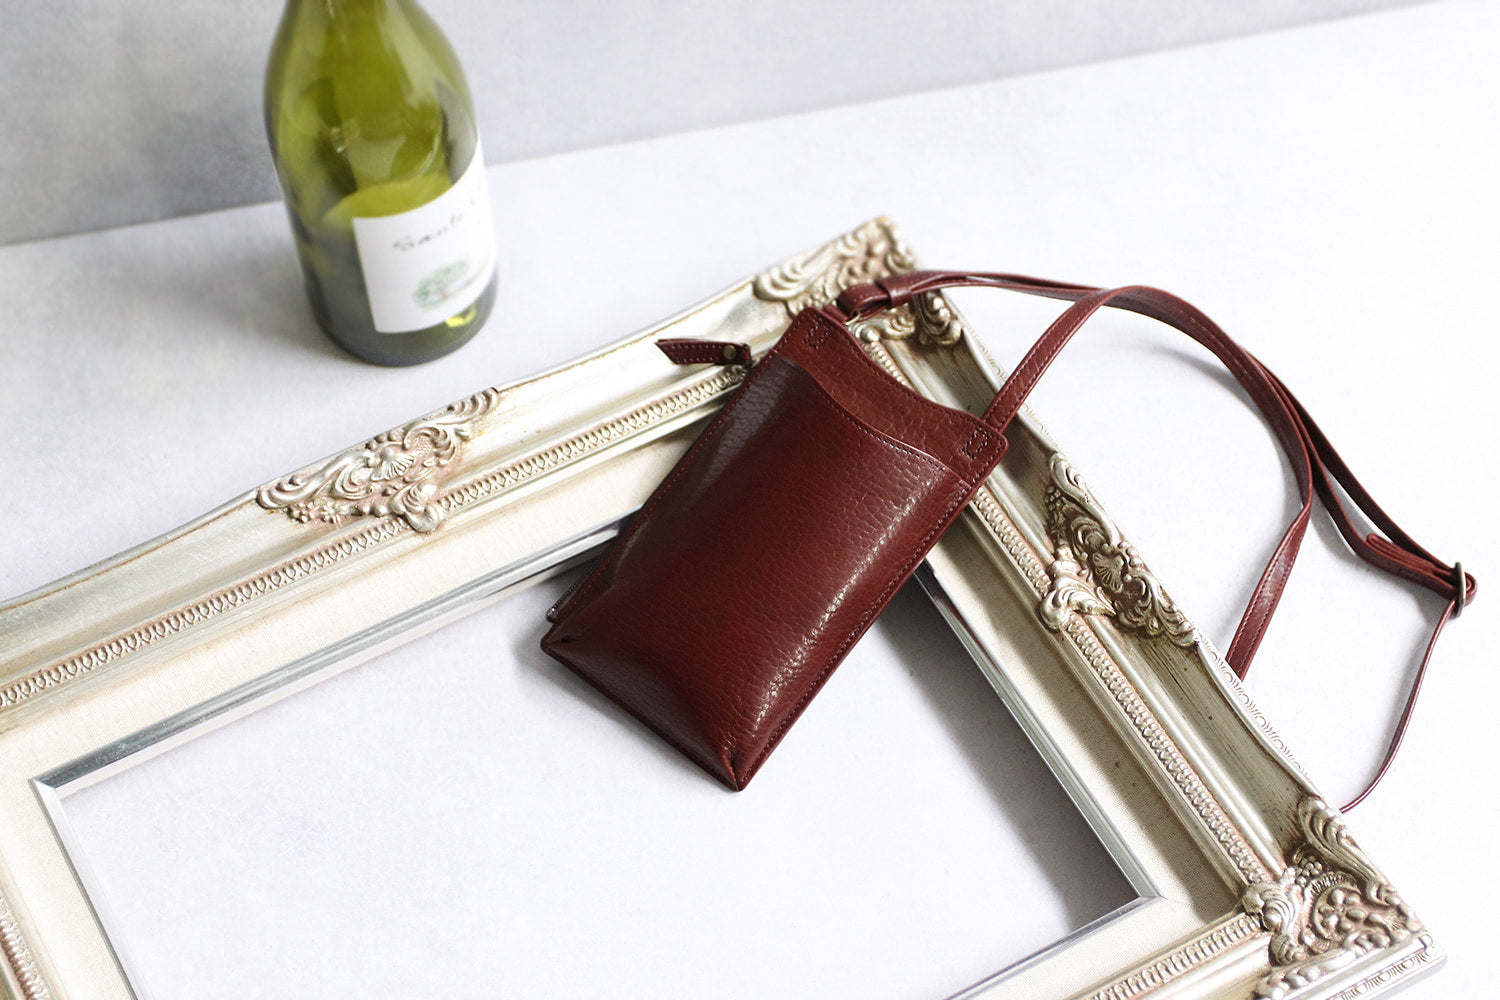 Atelier nuu / Lezza botanica vino Sustainable leather smartphone pouch dyed with wine residue 